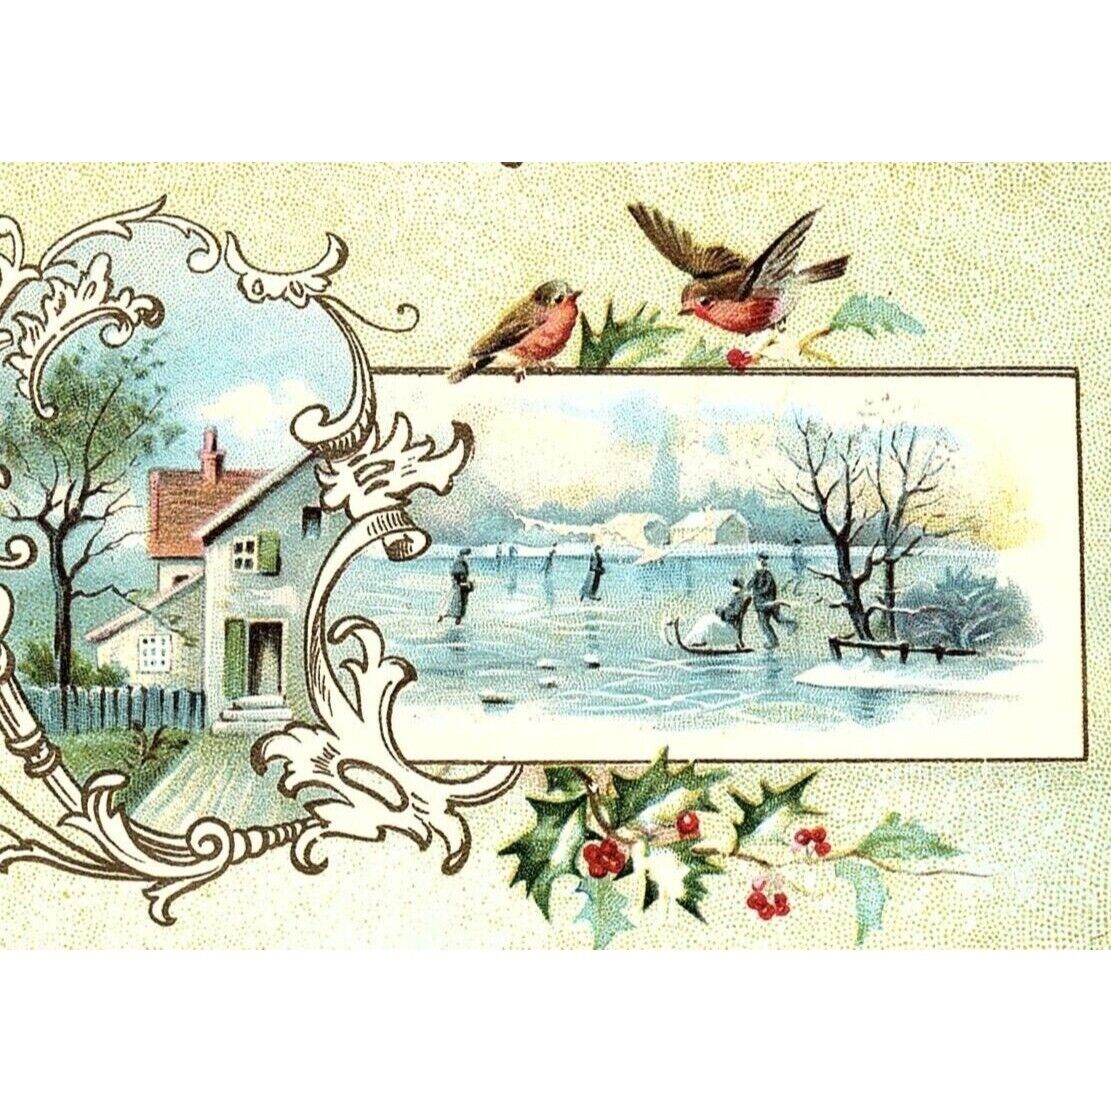 c1880 NEW ORLEANS COFFEE CO MORNING JOY JAVA WINTER VICTORIAN TRADE CARD P121